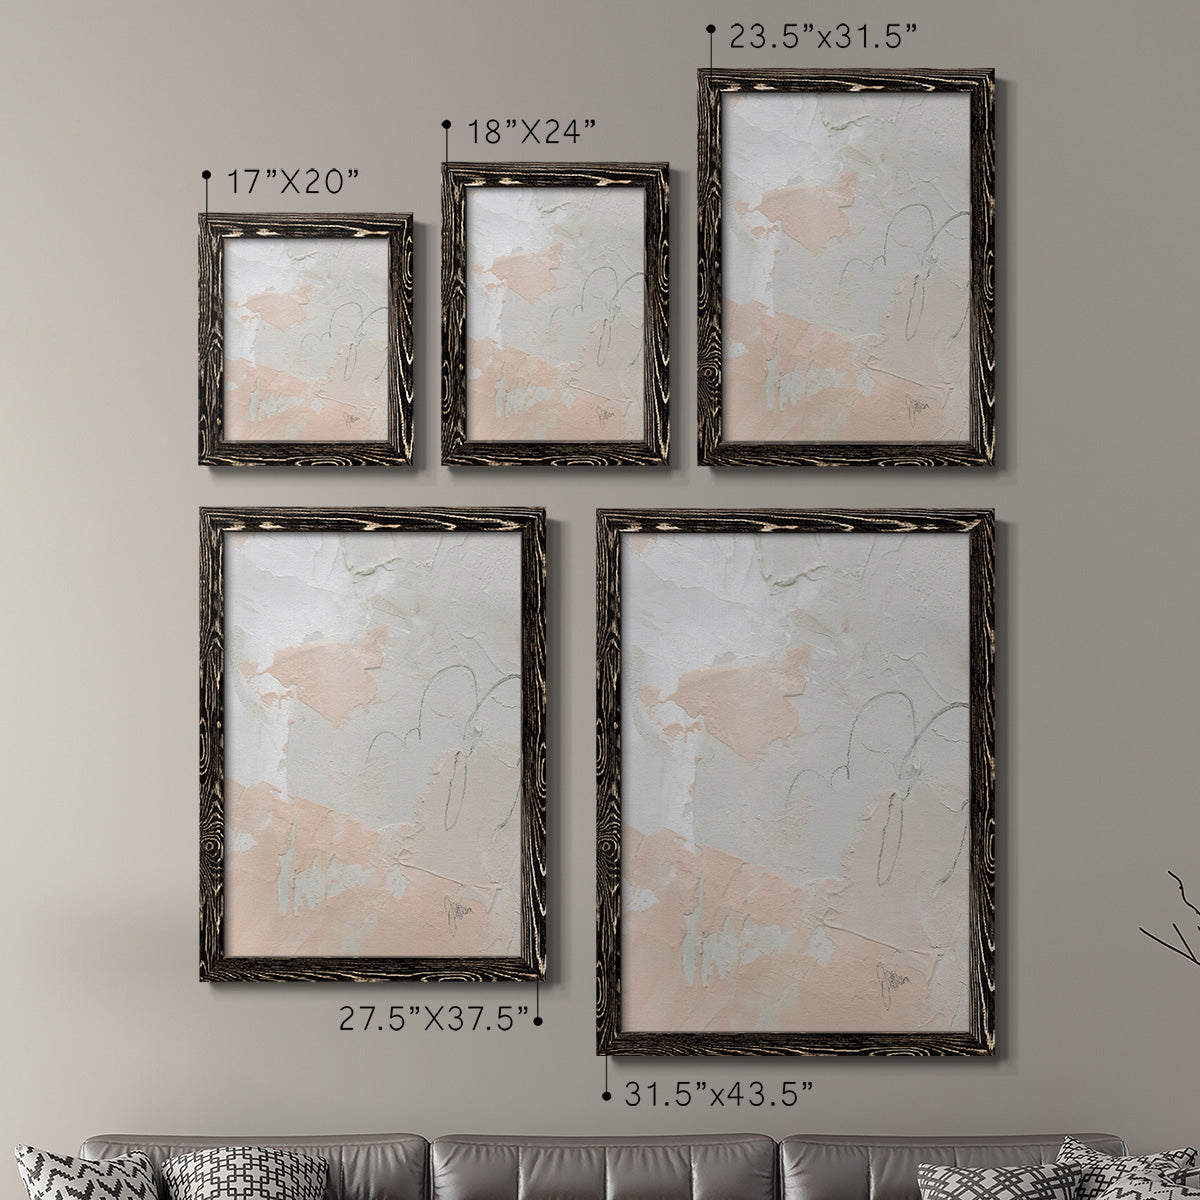 Twitch I - Premium Framed Canvas 2 Piece Set - Ready to Hang